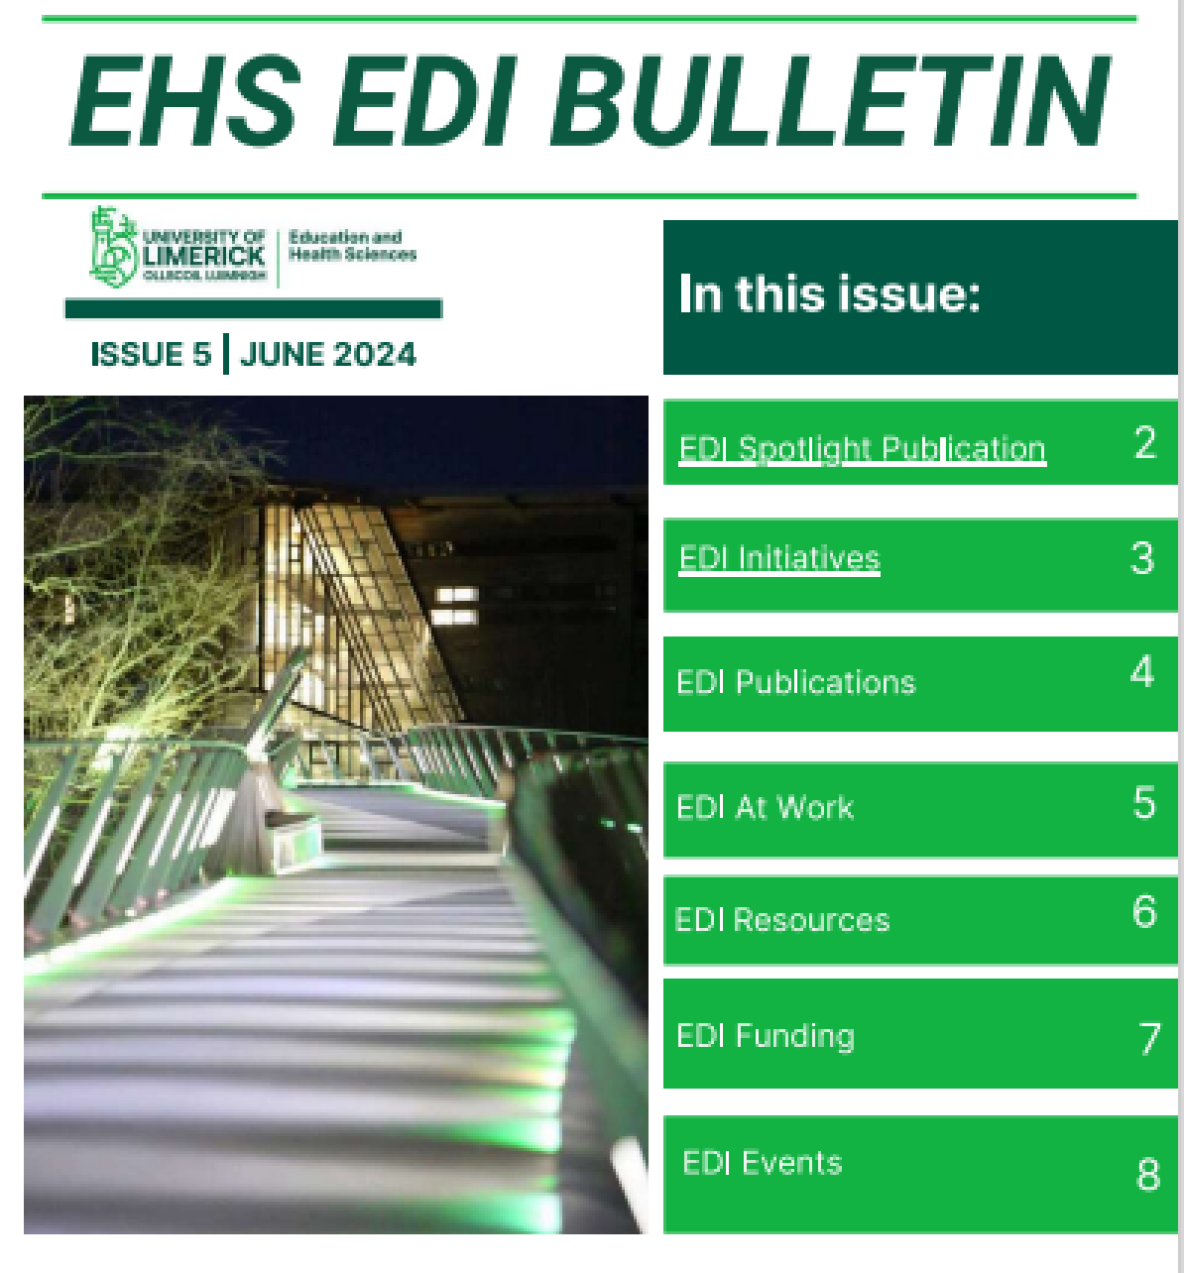 Cover Page of EHS EDI News Bulletin Issue 5 June 2024